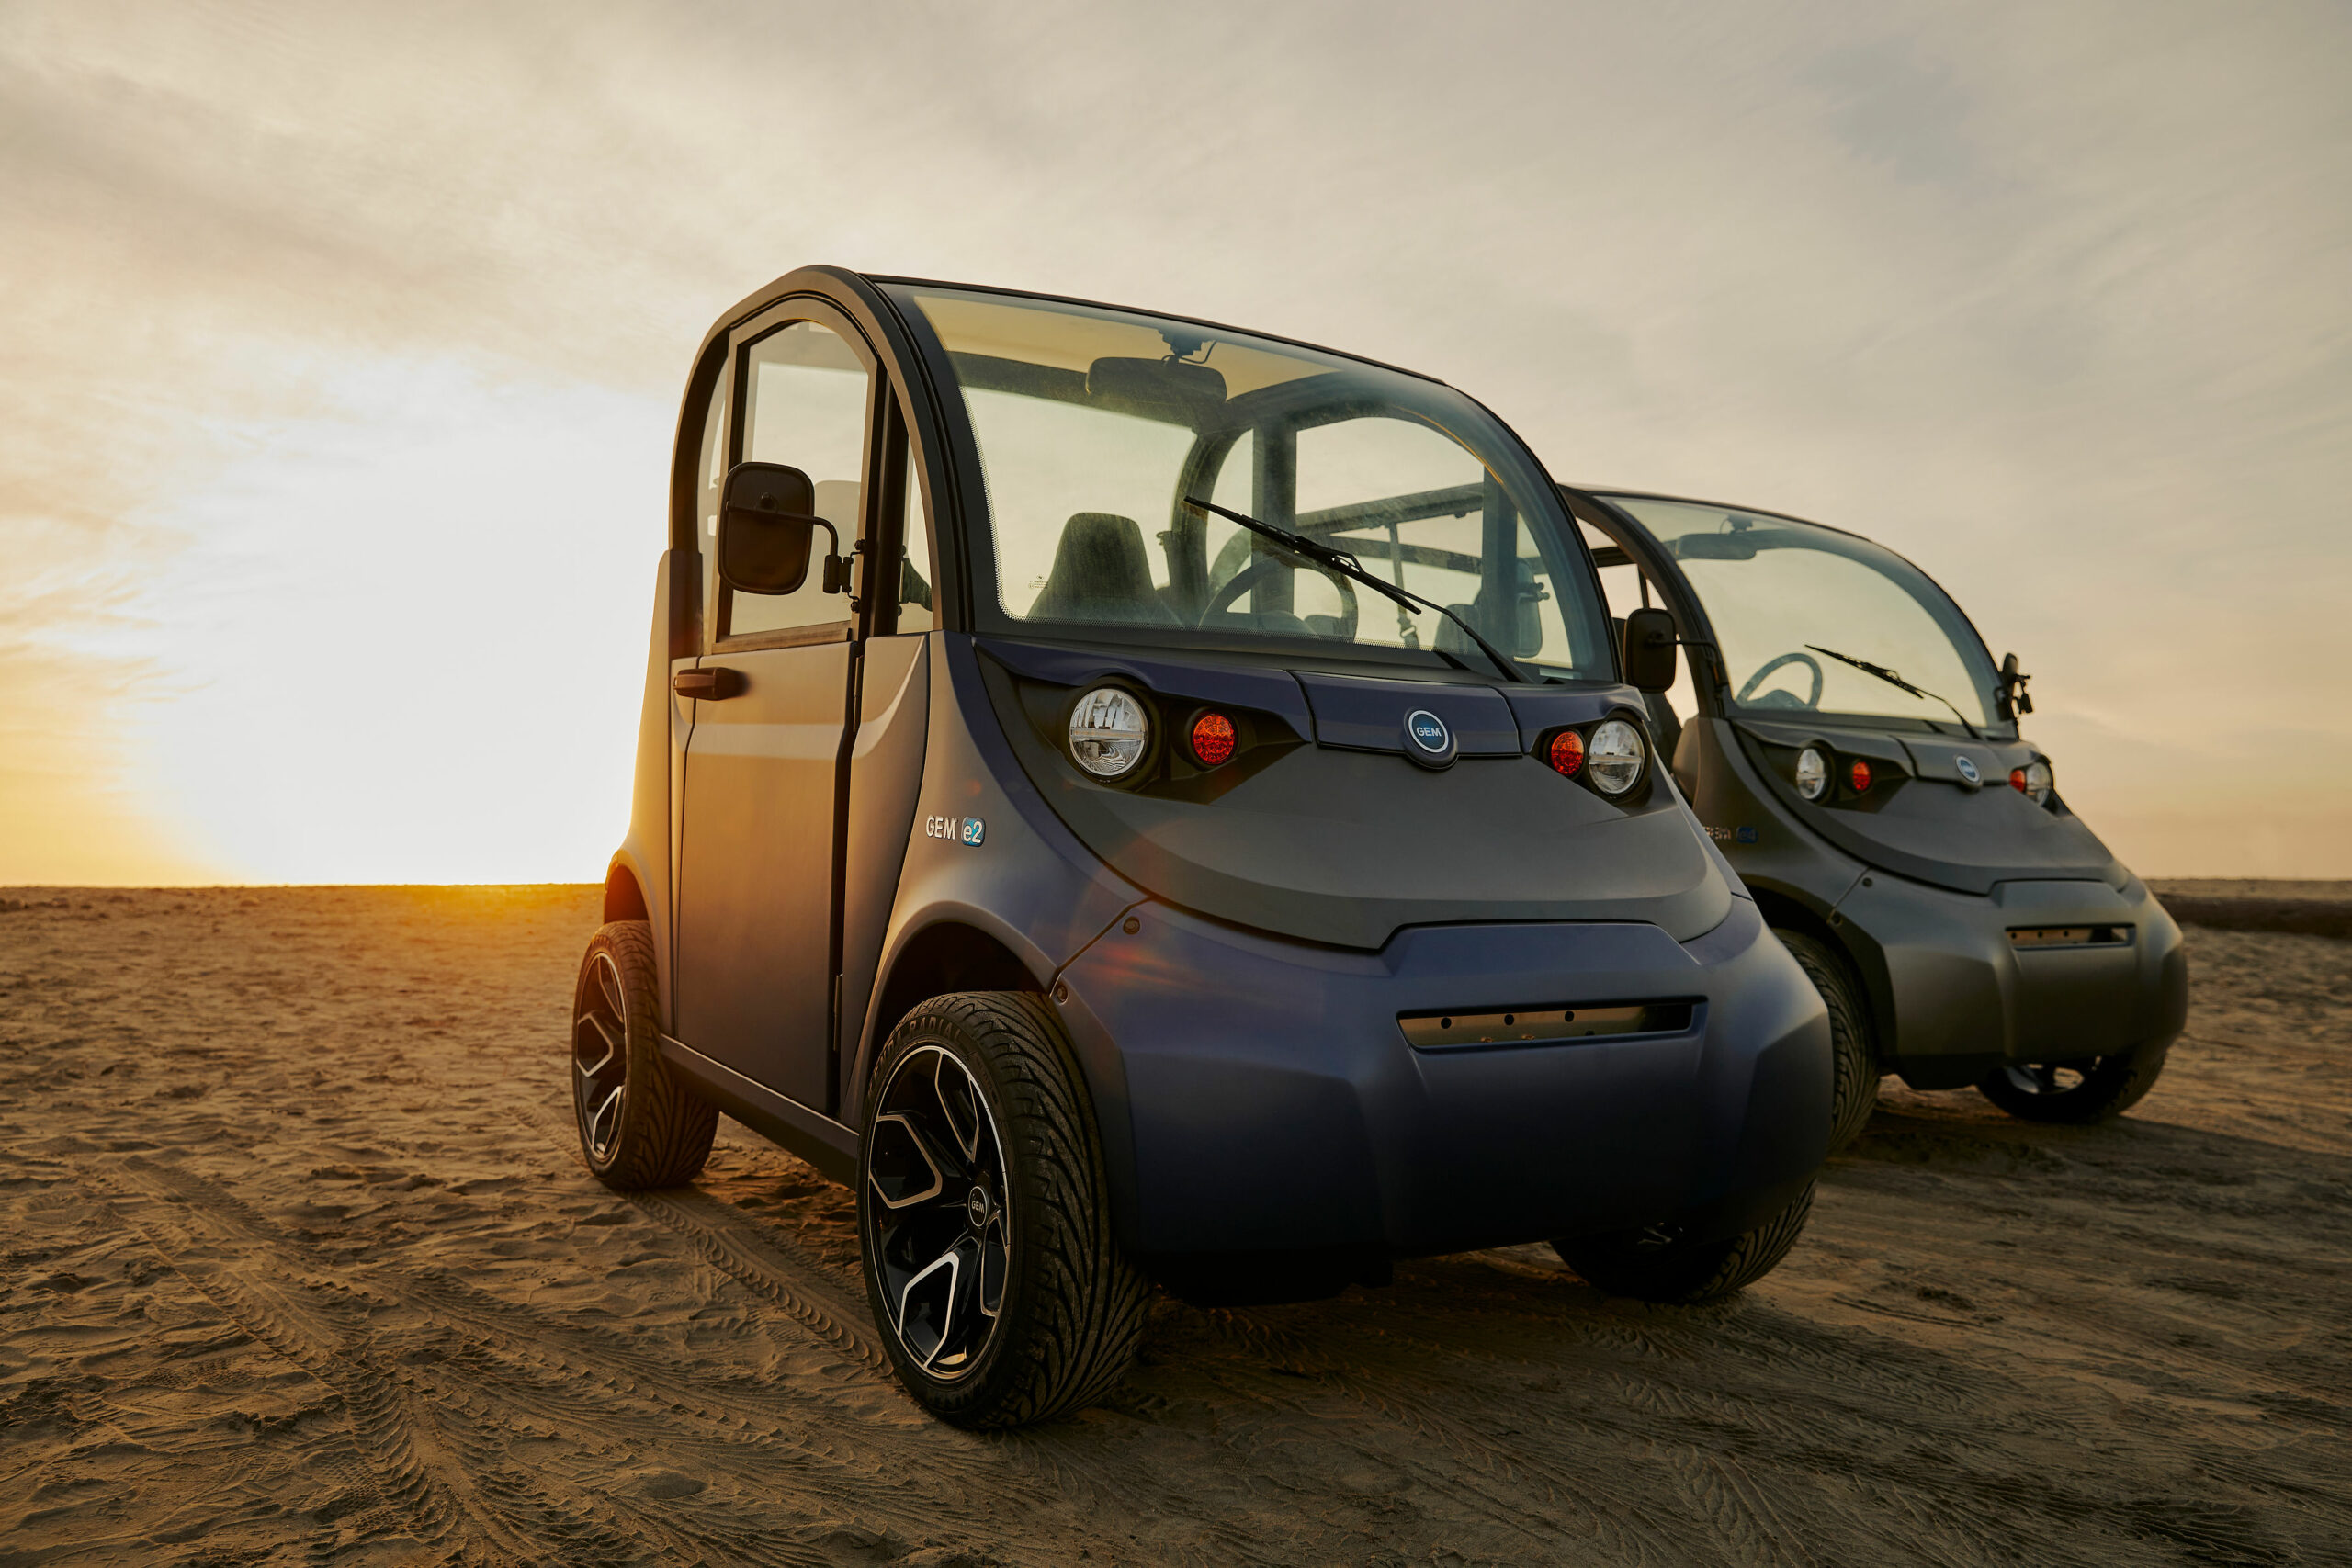 Two electric vehicles parked side by side in the sand at sunset